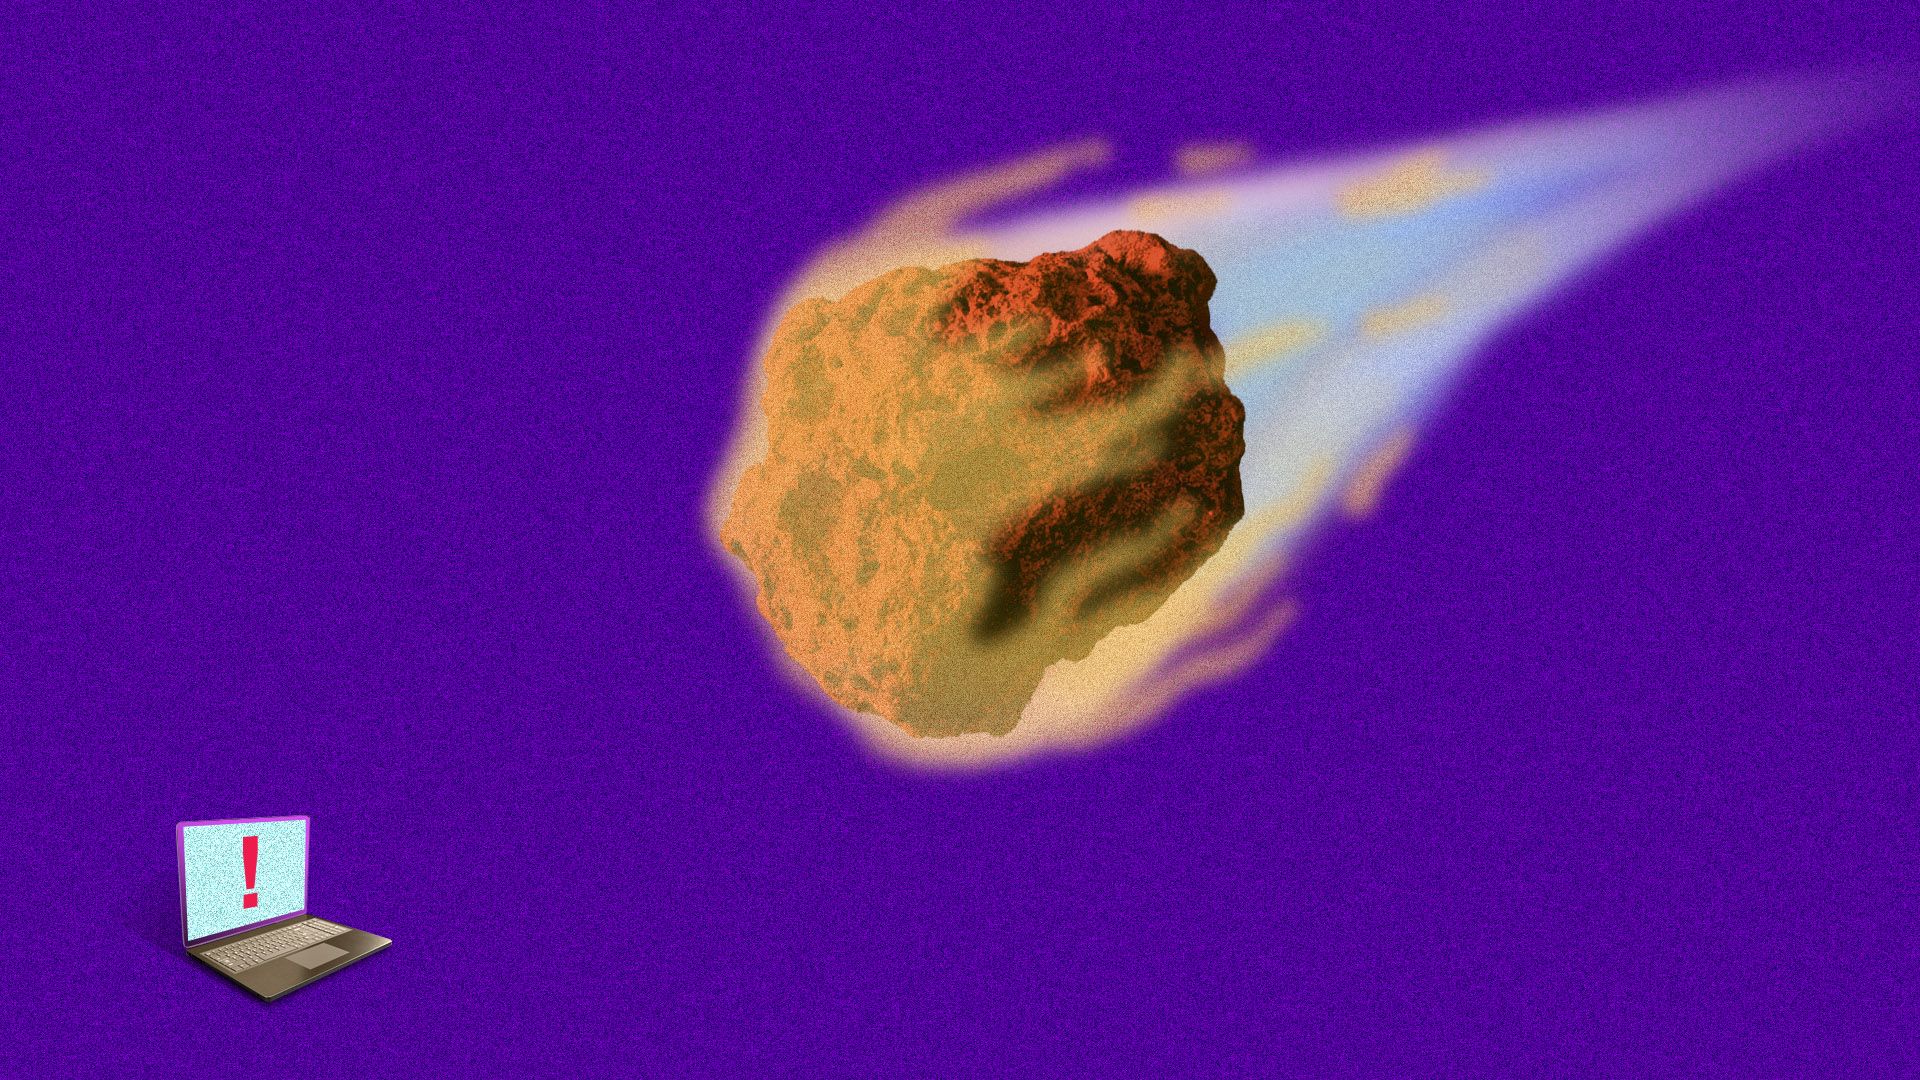 An illustration of a flaming meteor headed for a laptop, over a purple background.